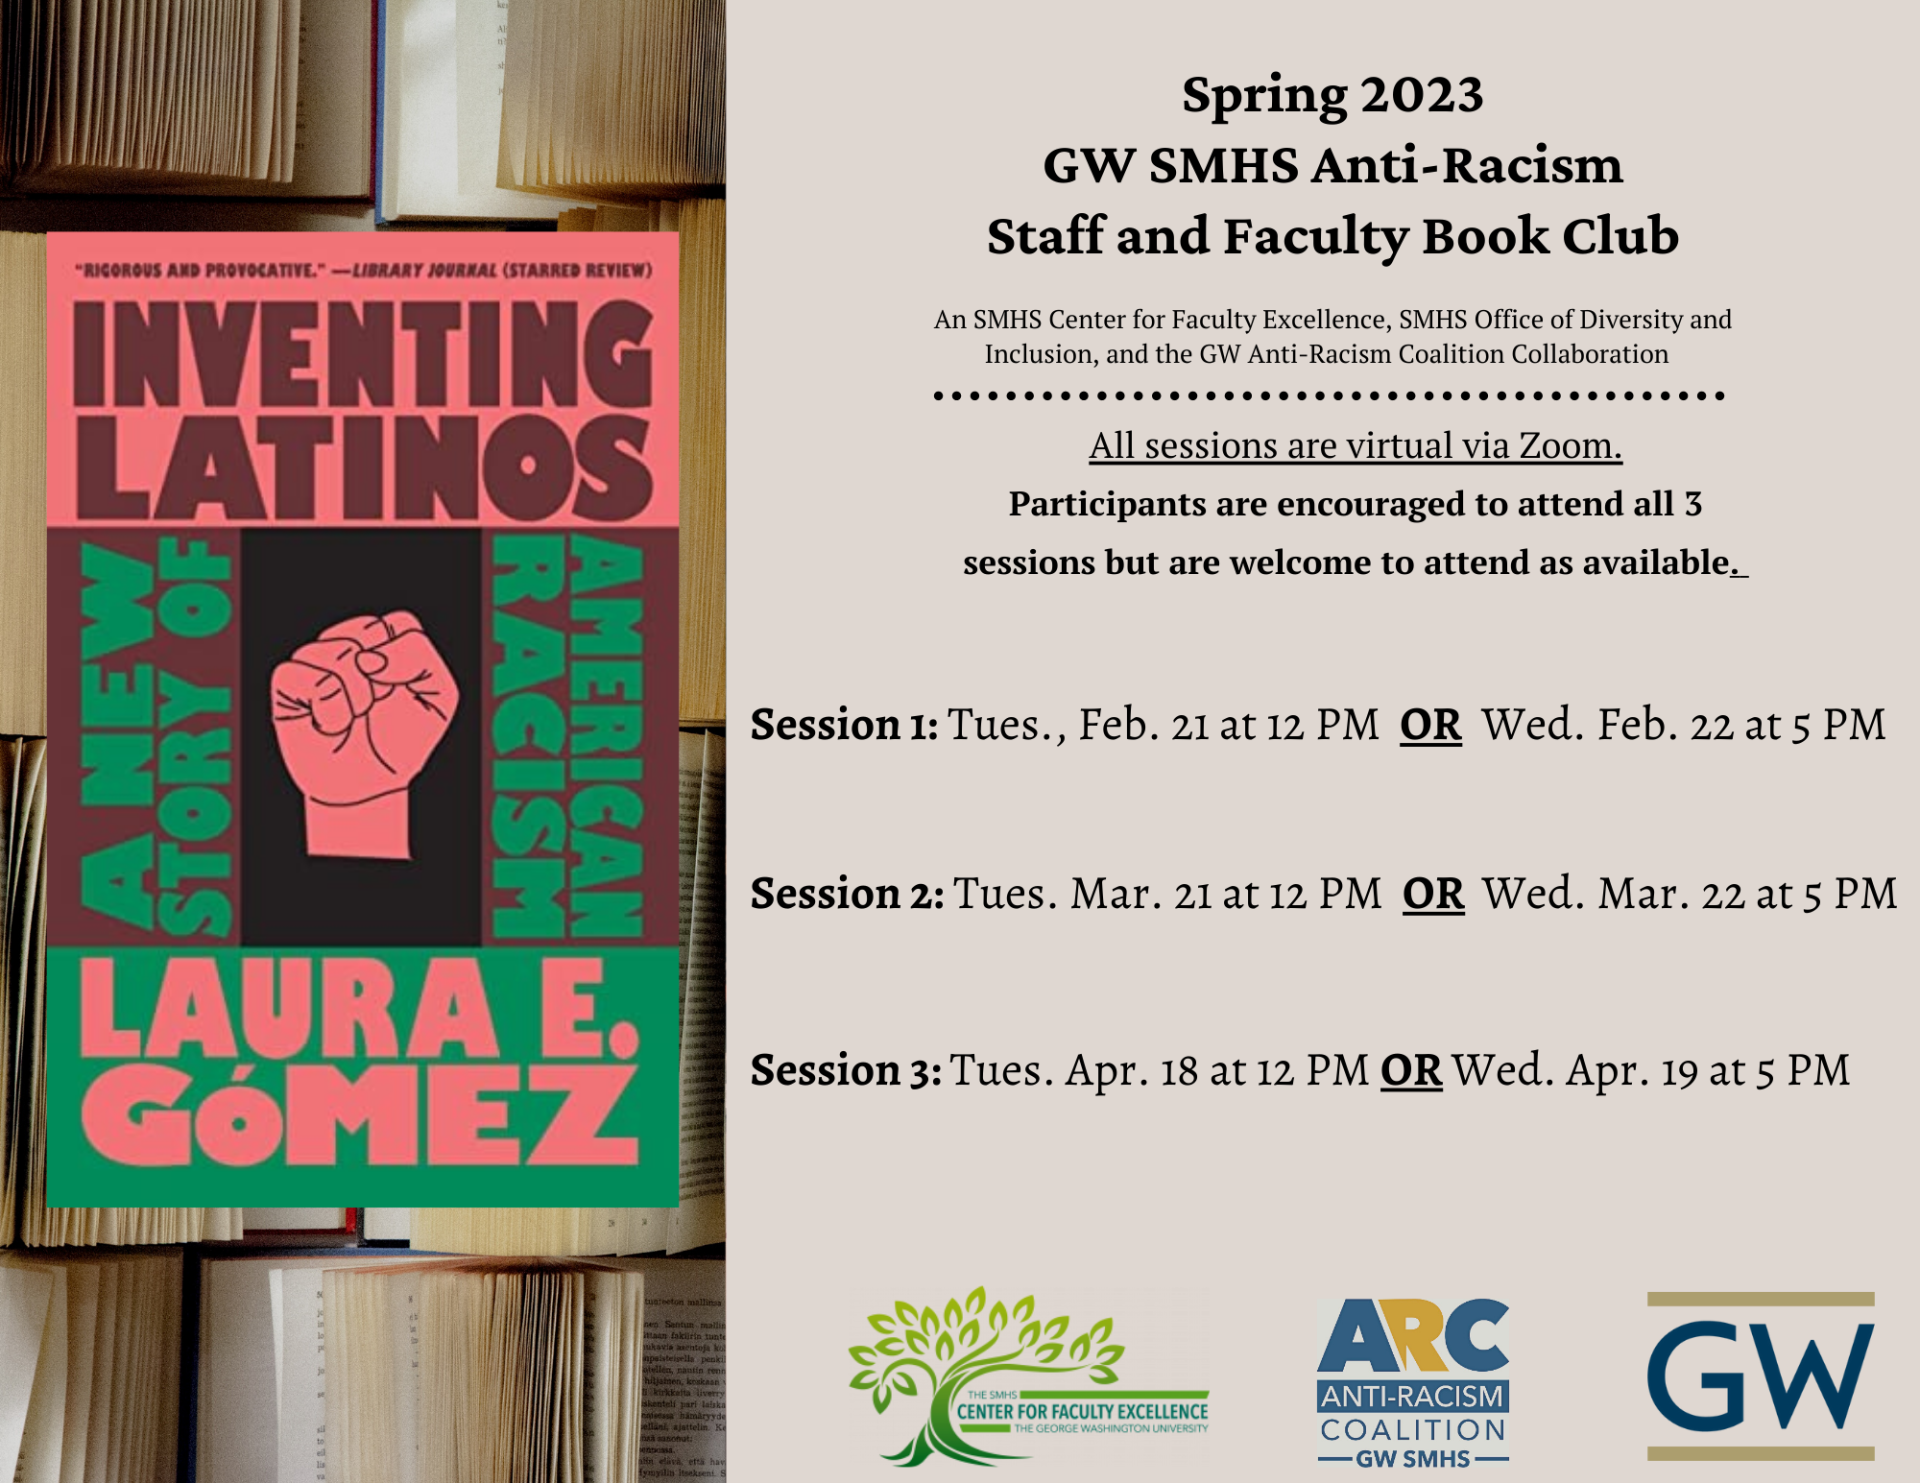 Flyer promoting inventing latinos book club selection